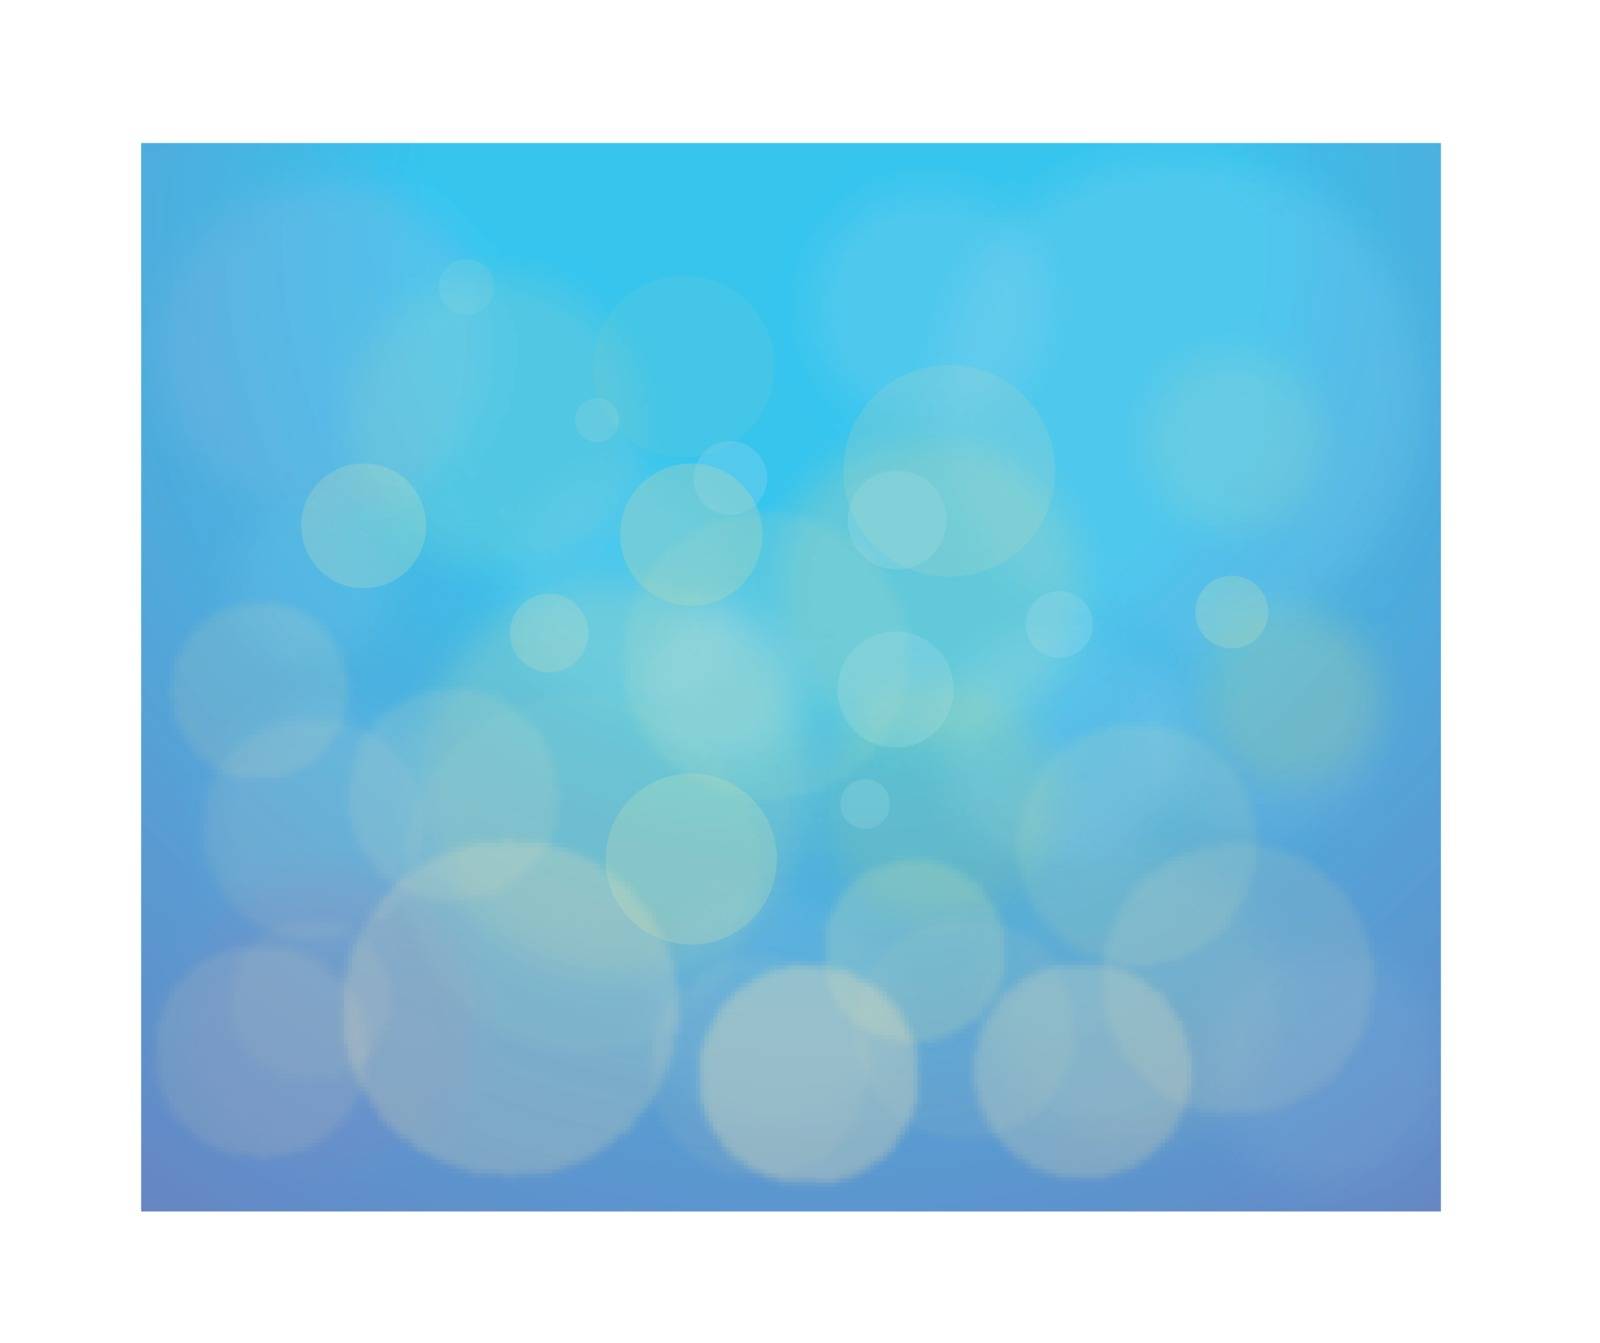 Illustration of blury shapes abstract background